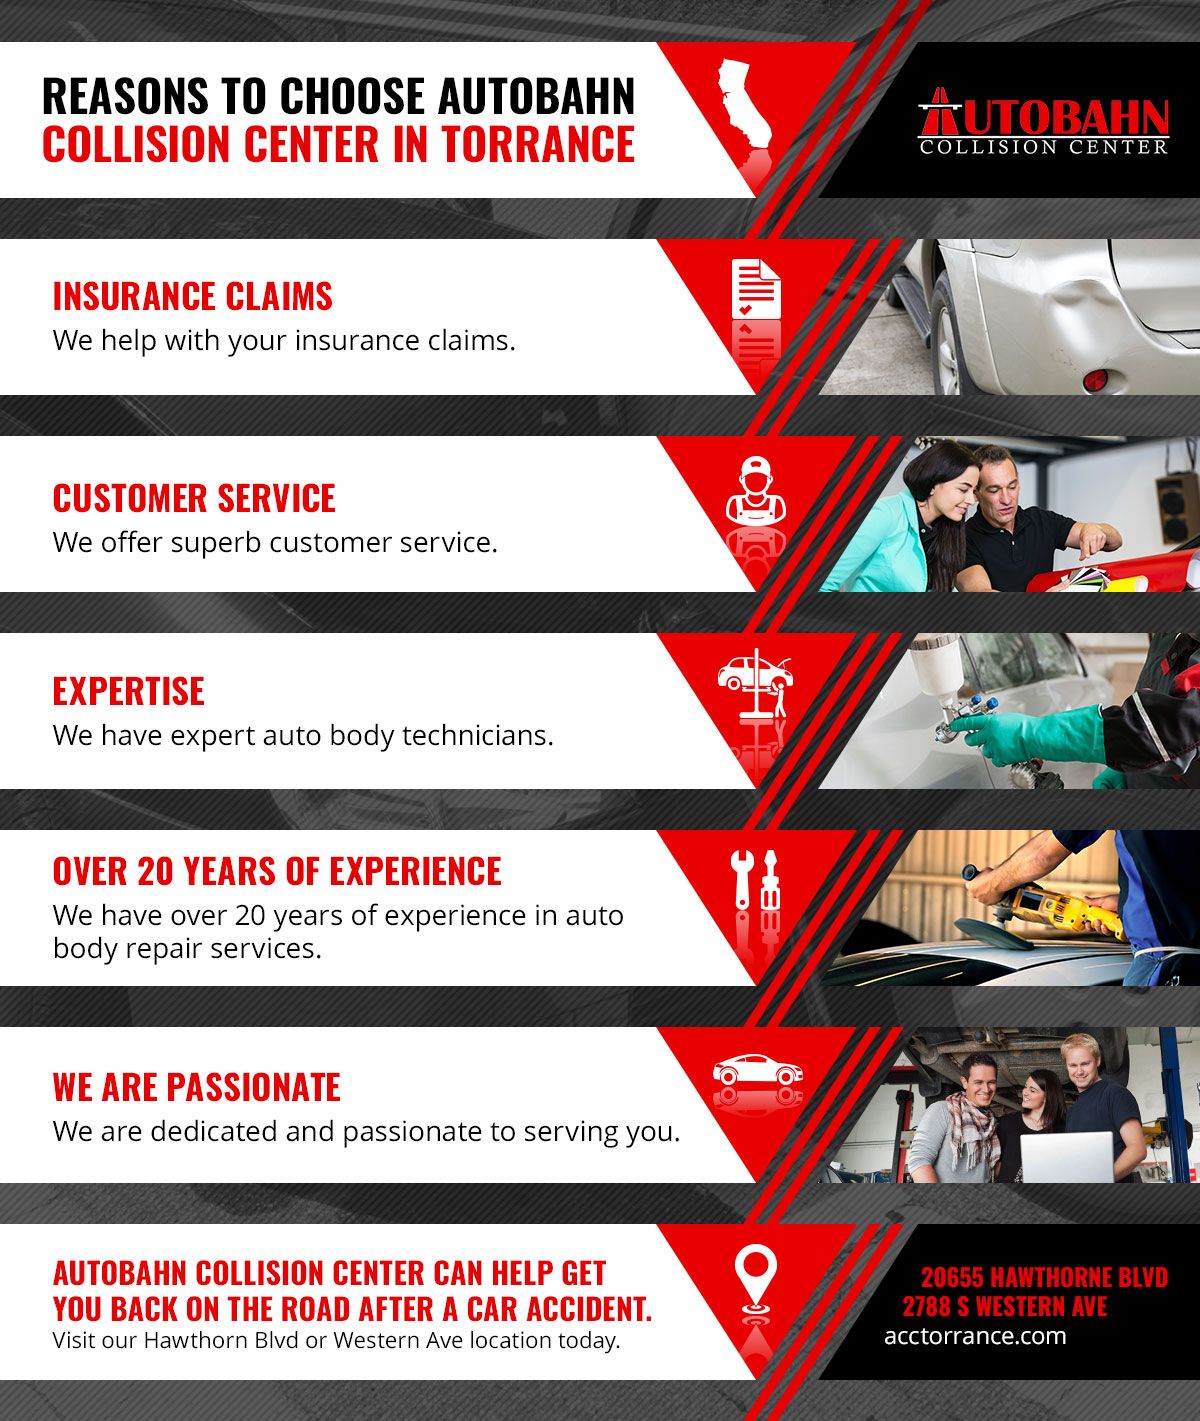 Reasons-to-Choose-Autobahn-Collision-Center-in-Torrance-Infographic-5ea9d2873e2e1.jpg